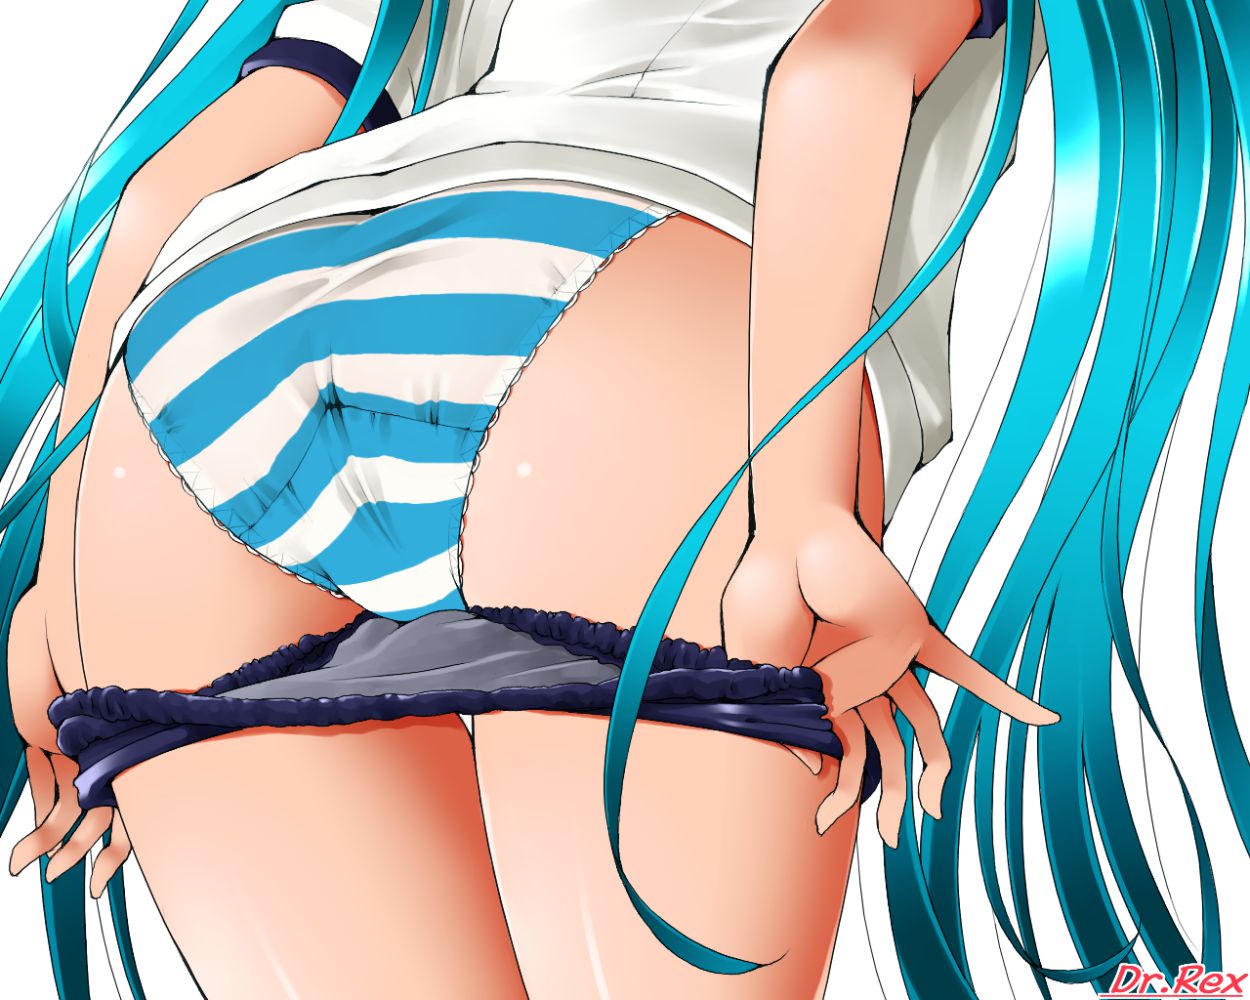 Miku's other, vocaloid's image summary. Vol. 3 38